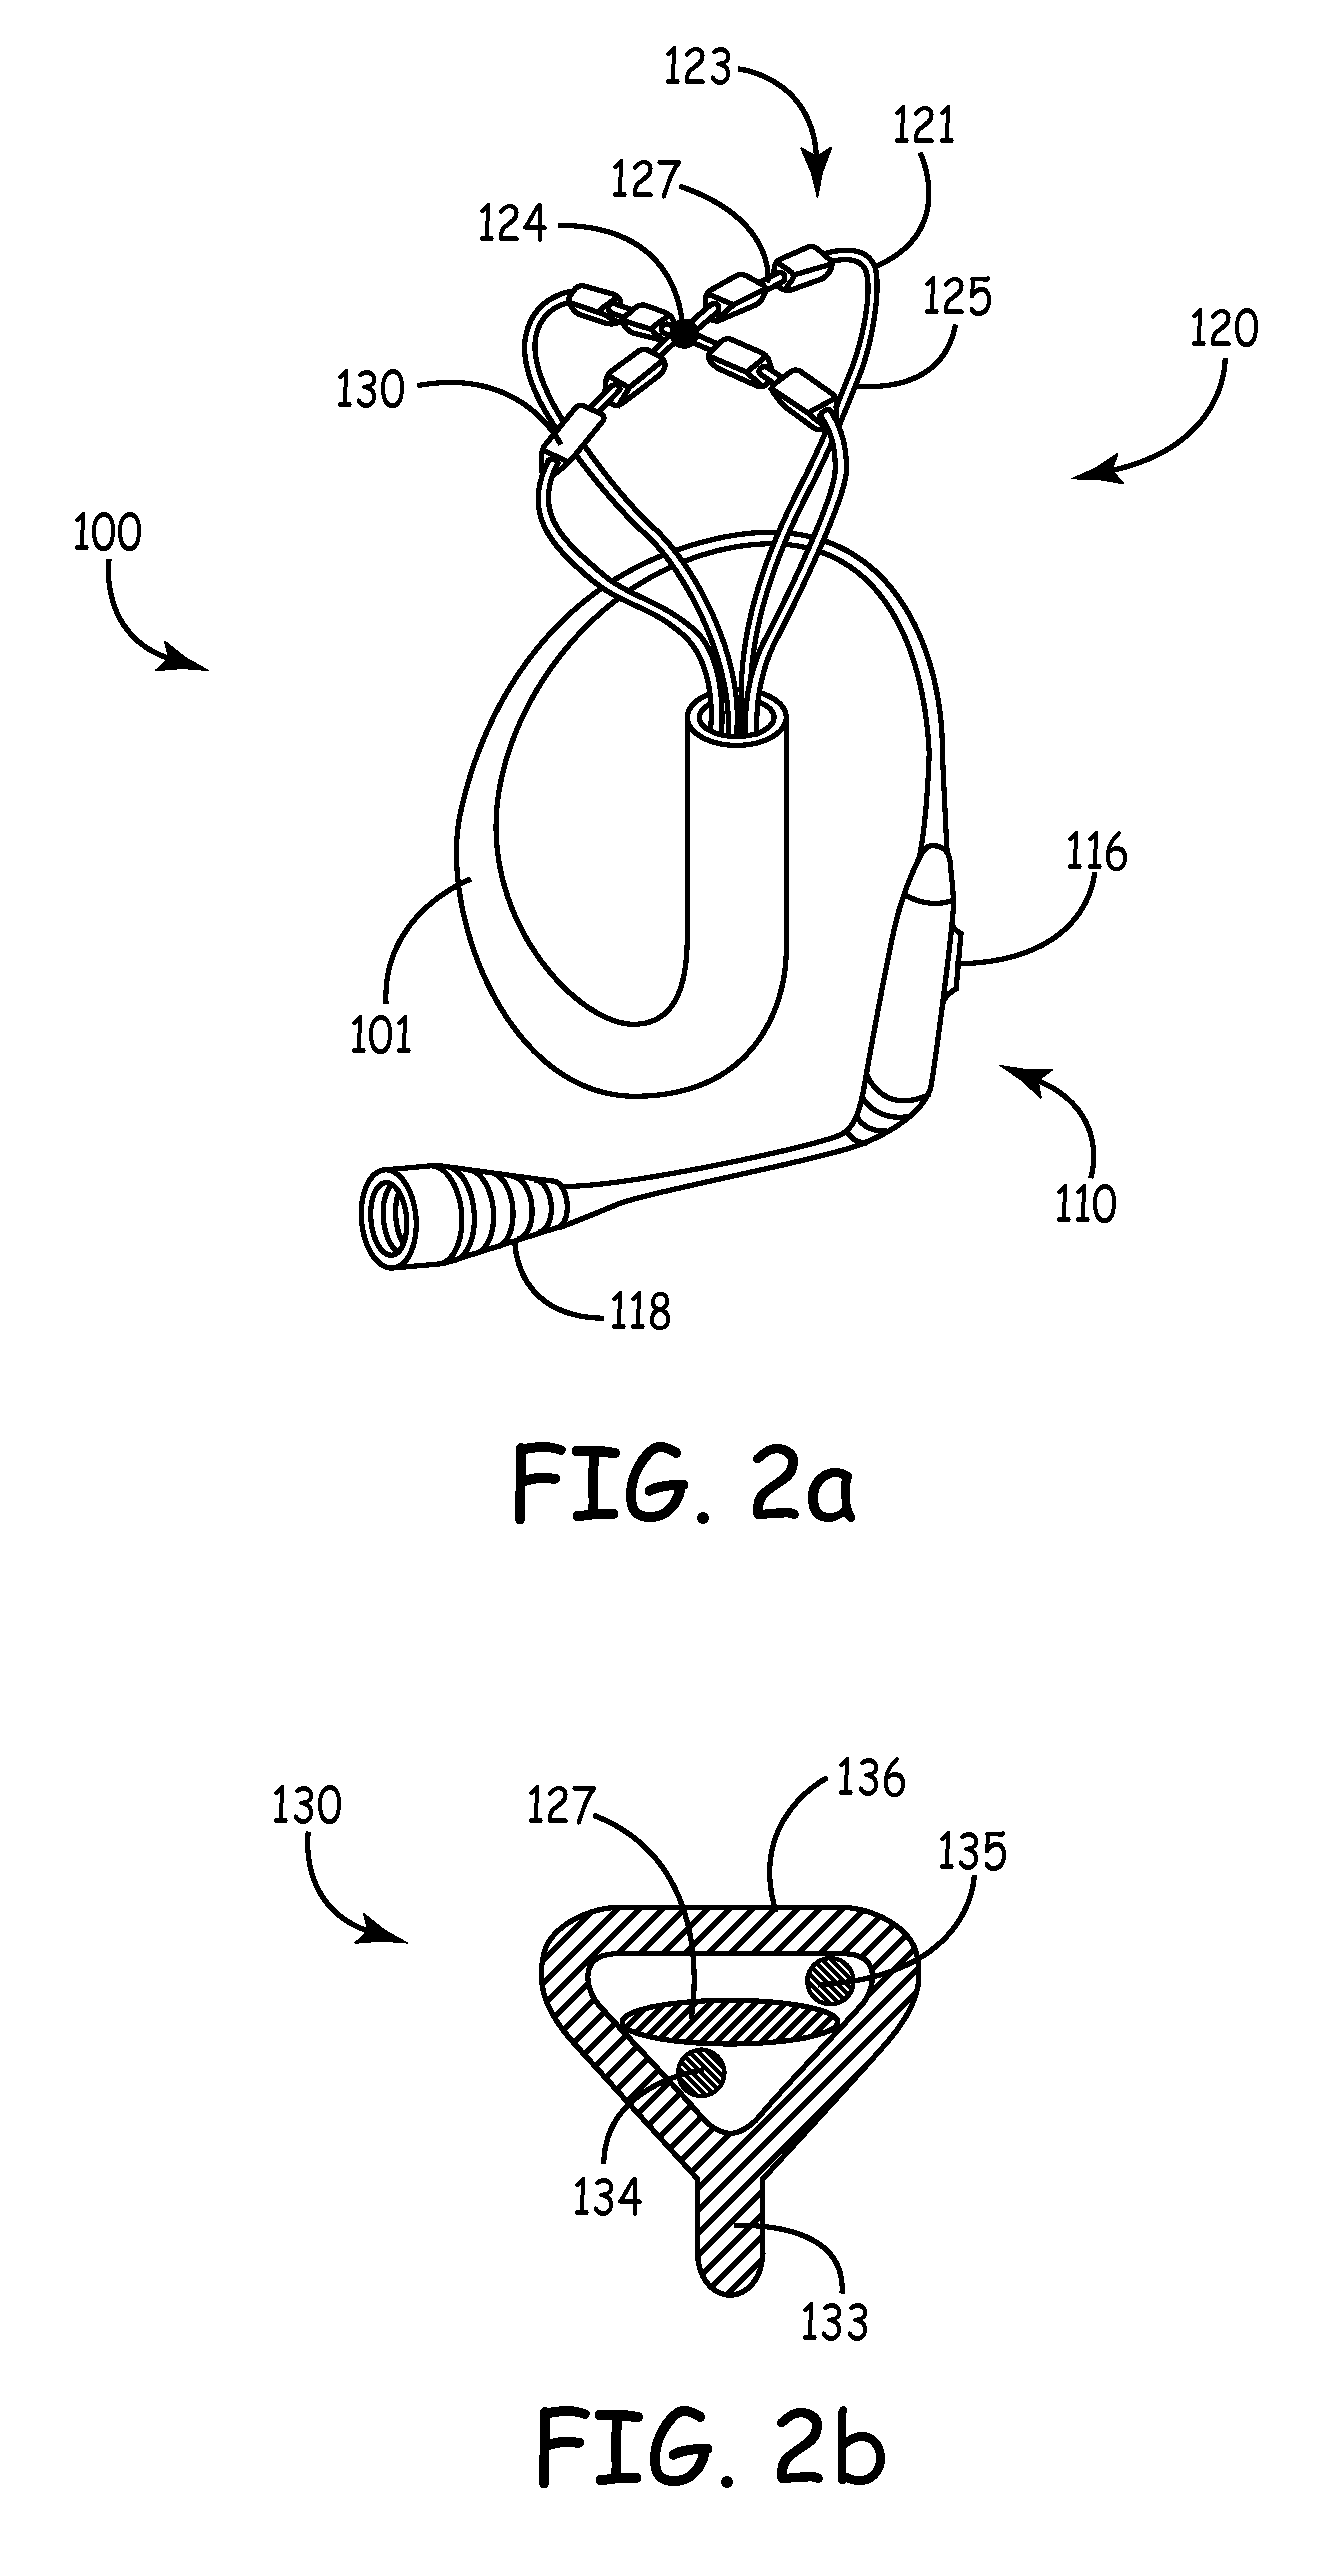 Low Power Tissue Ablation System